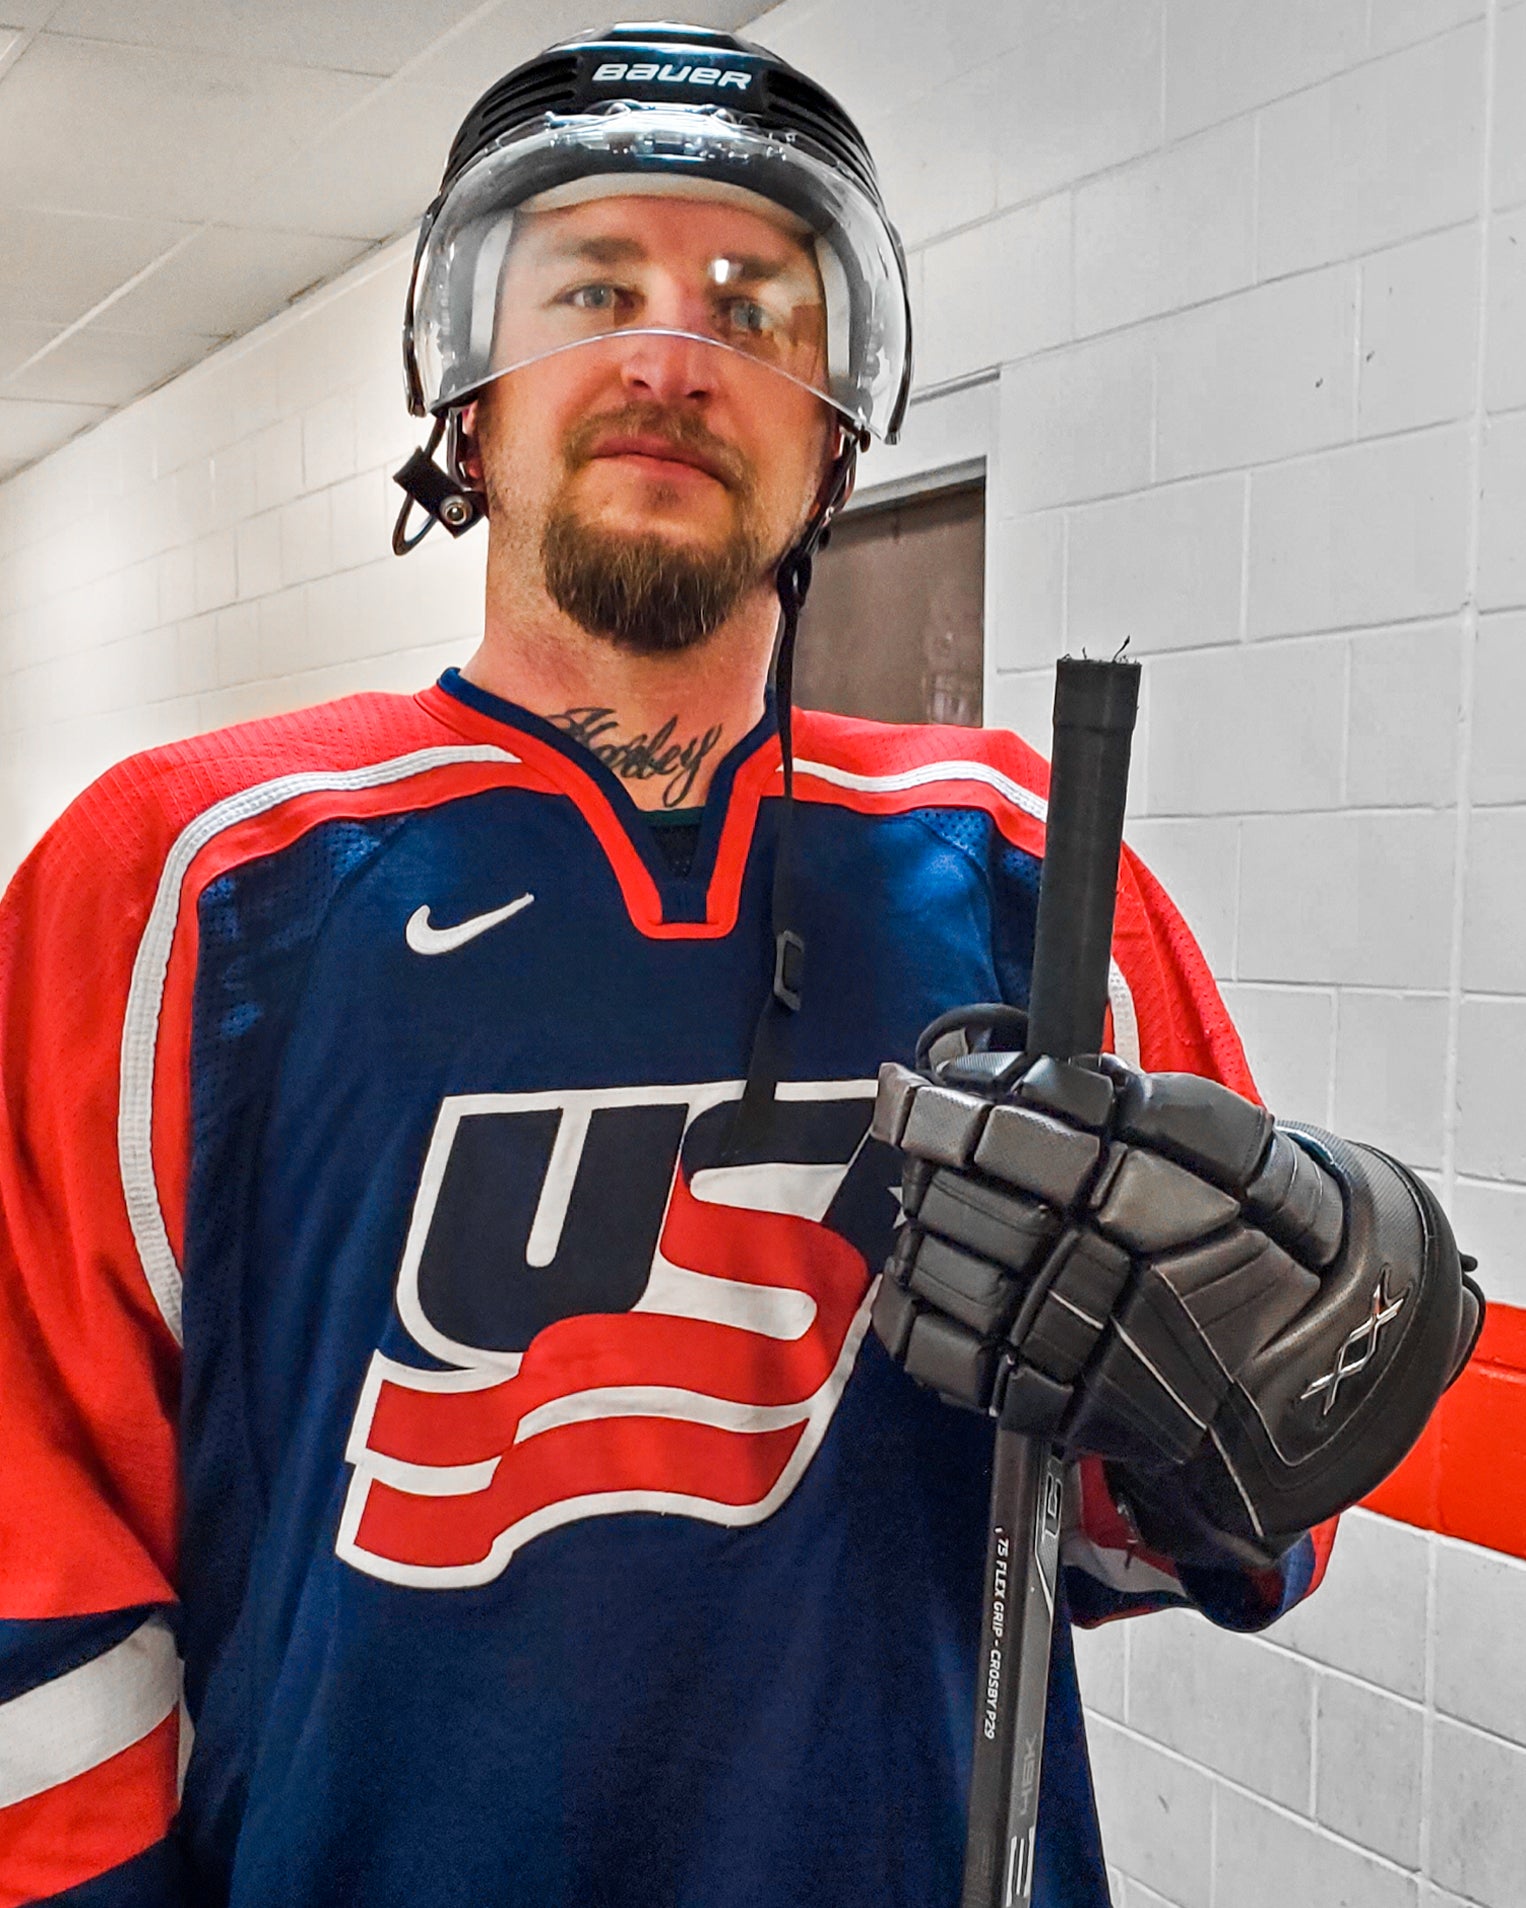 Team Amplife® Ambassador Cassidy Esty getting ready to play for the USA Stand-up Amputee Hockey Team